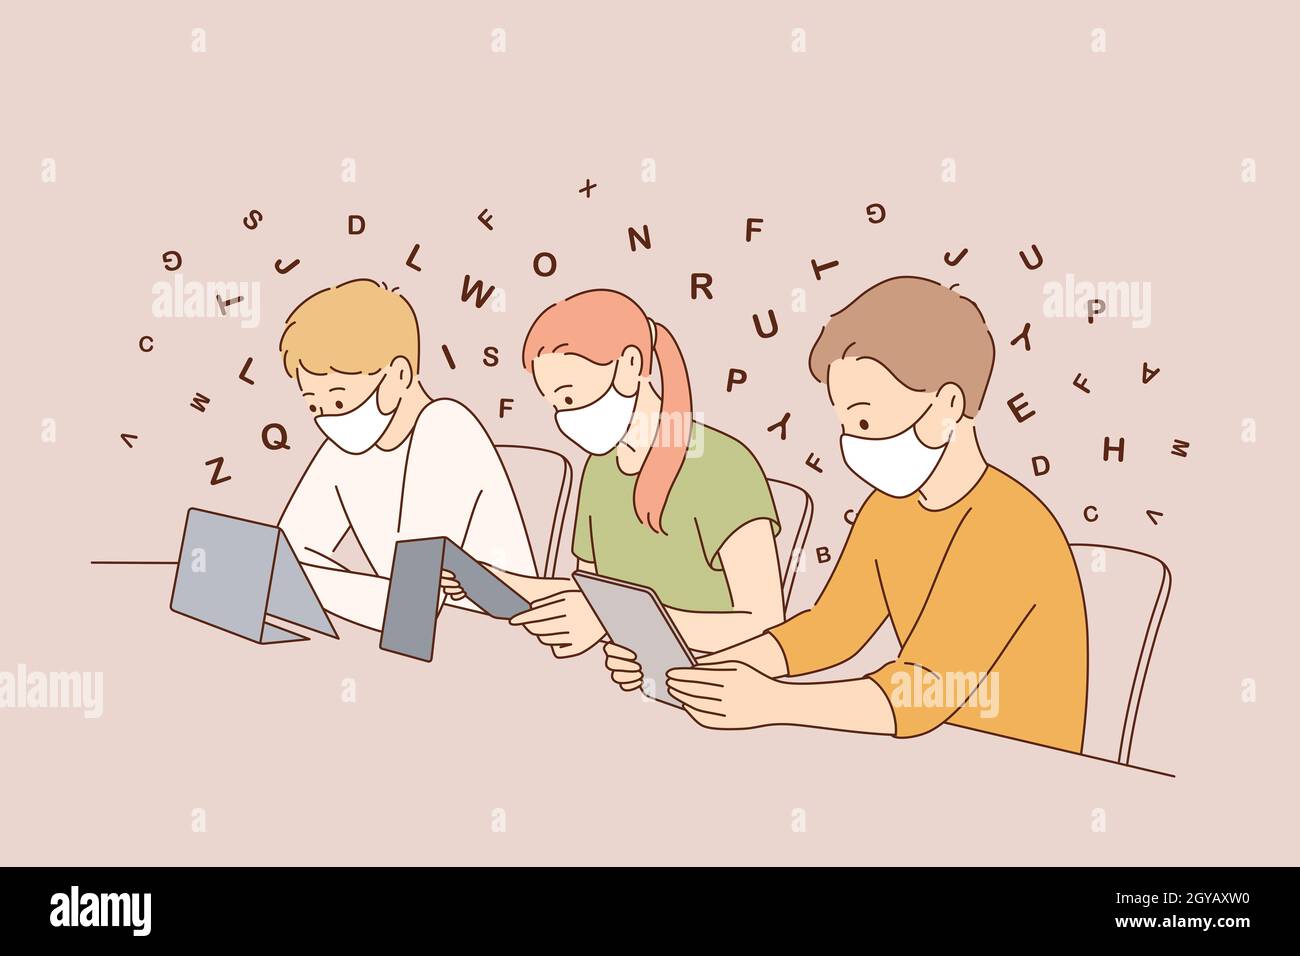 Online education during covid-19 concept. Group of students pupils in medical protective masks cartoon characters sitting with tablets learning alphab Stock Photo